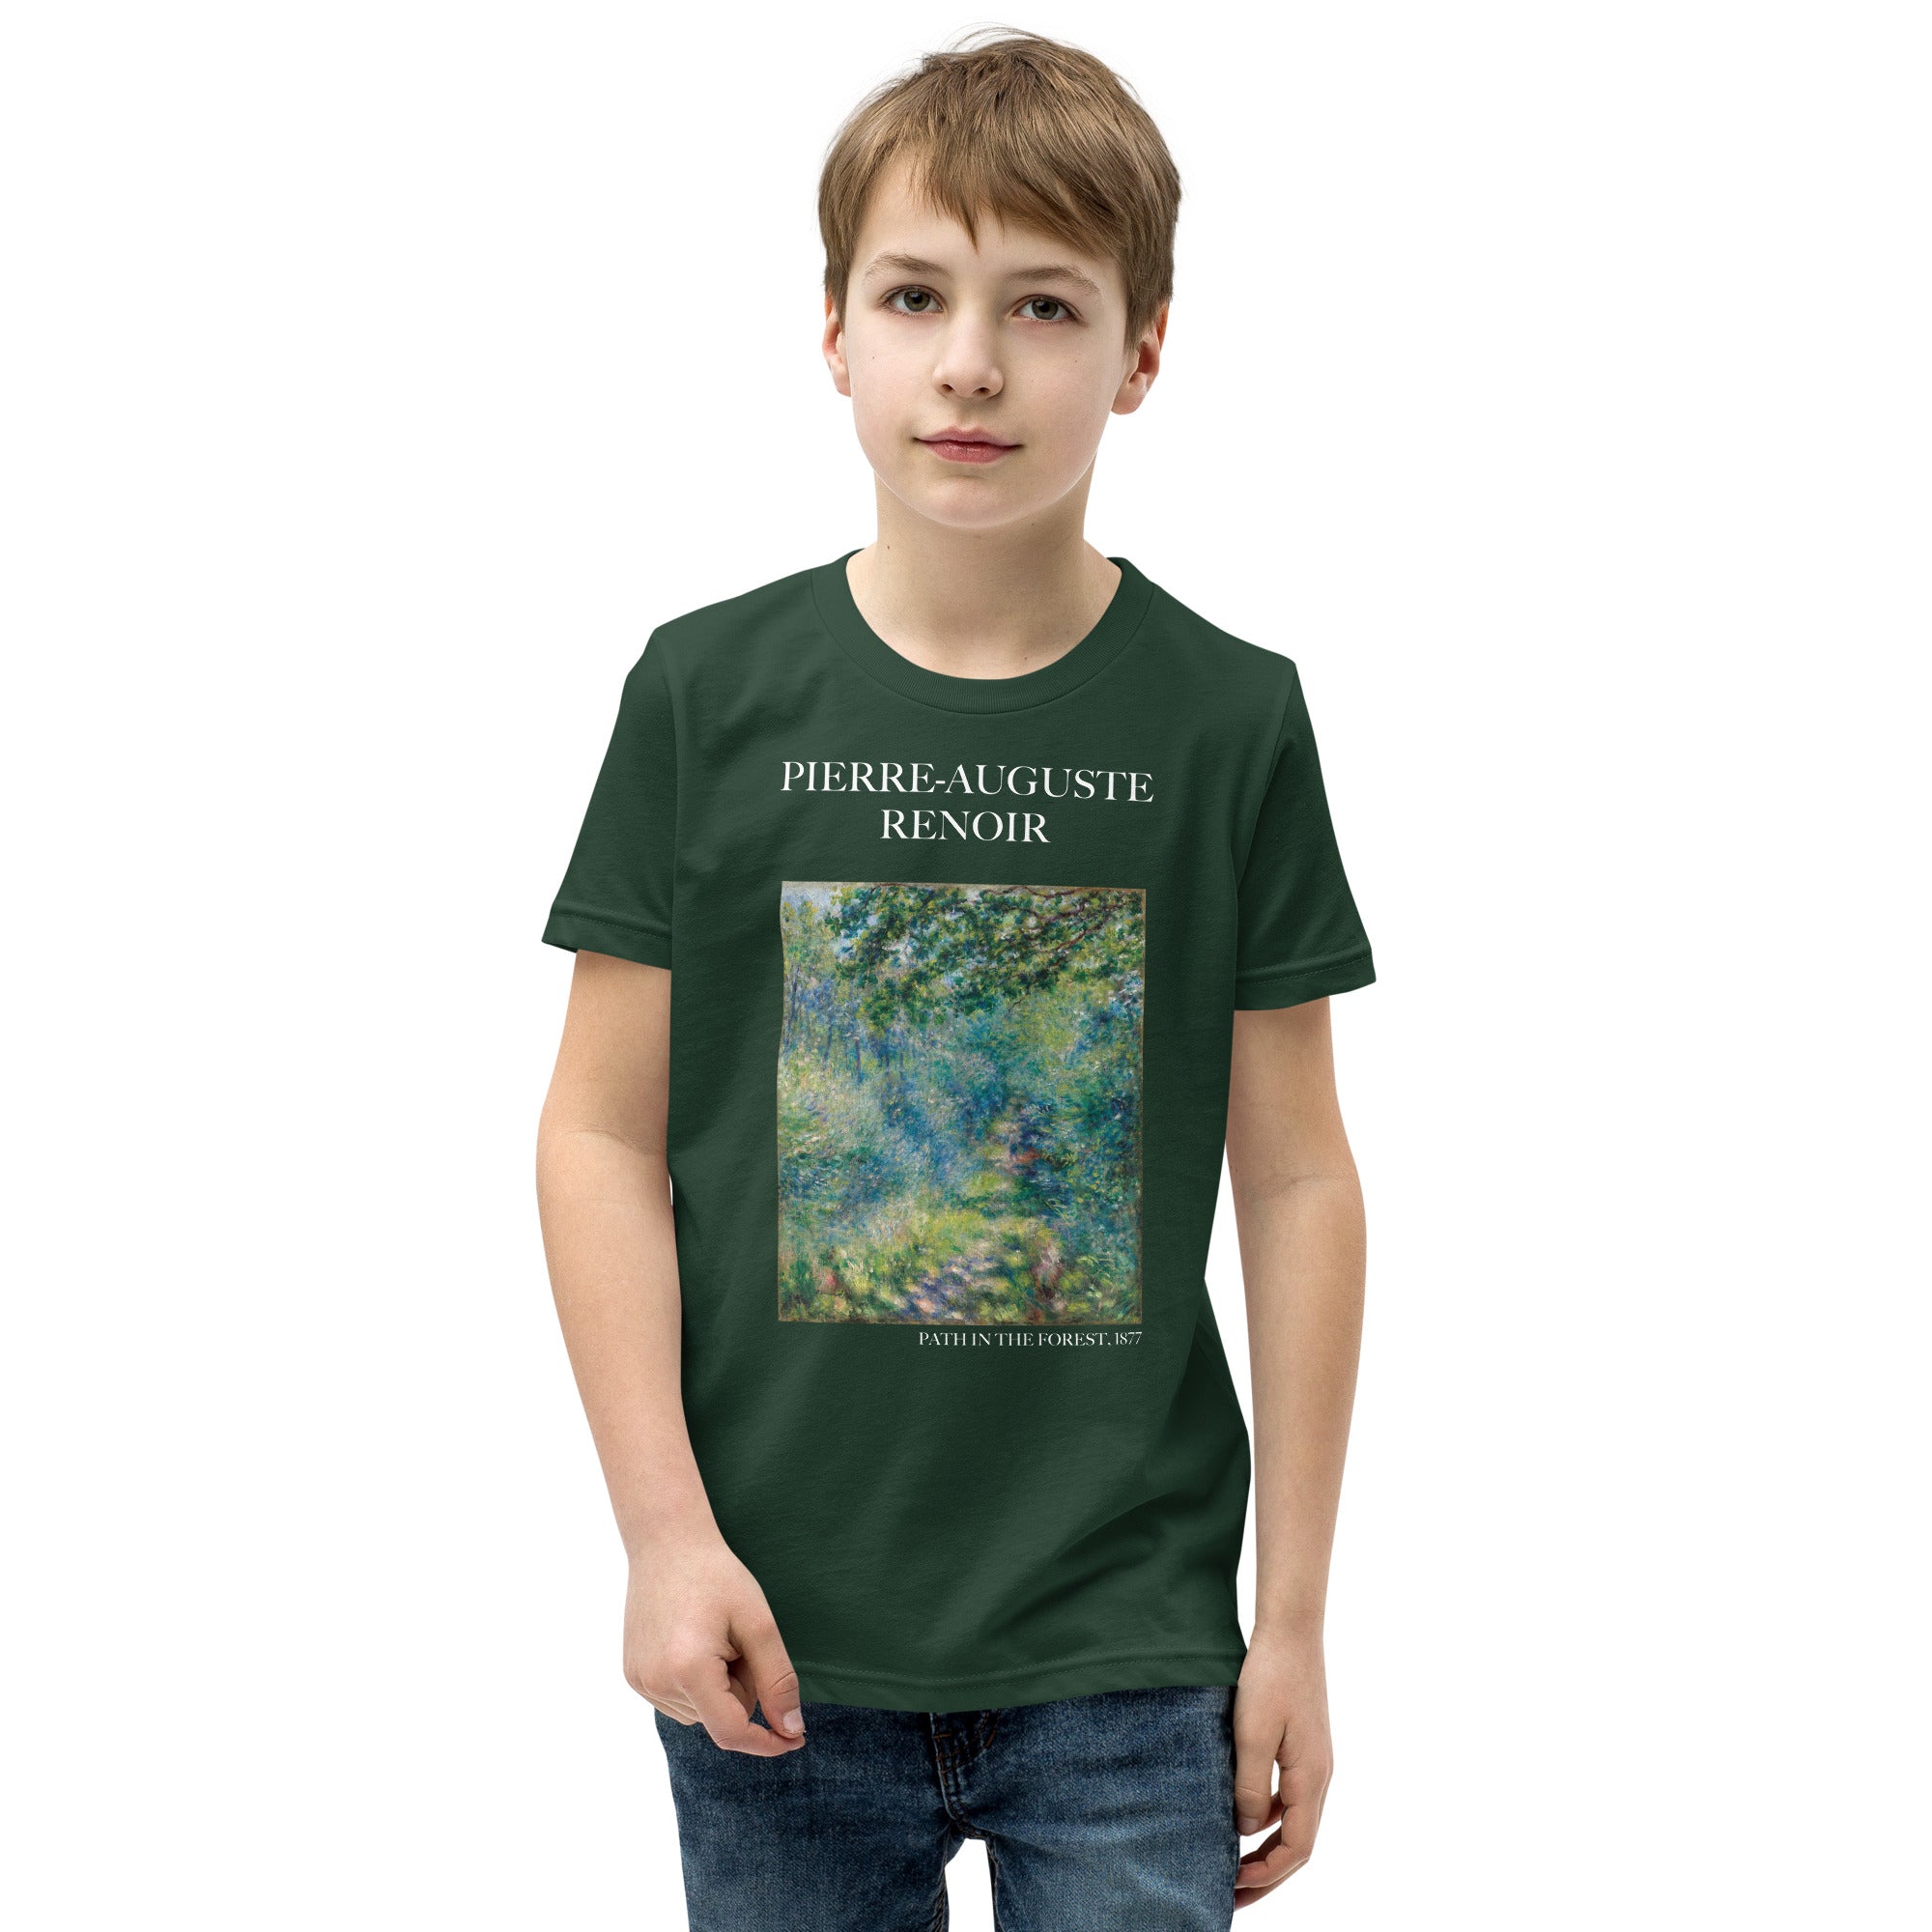 Pierre-Auguste Renoir 'Path in the Forest' Famous Painting Short Sleeve T-Shirt | Premium Youth Art Tee